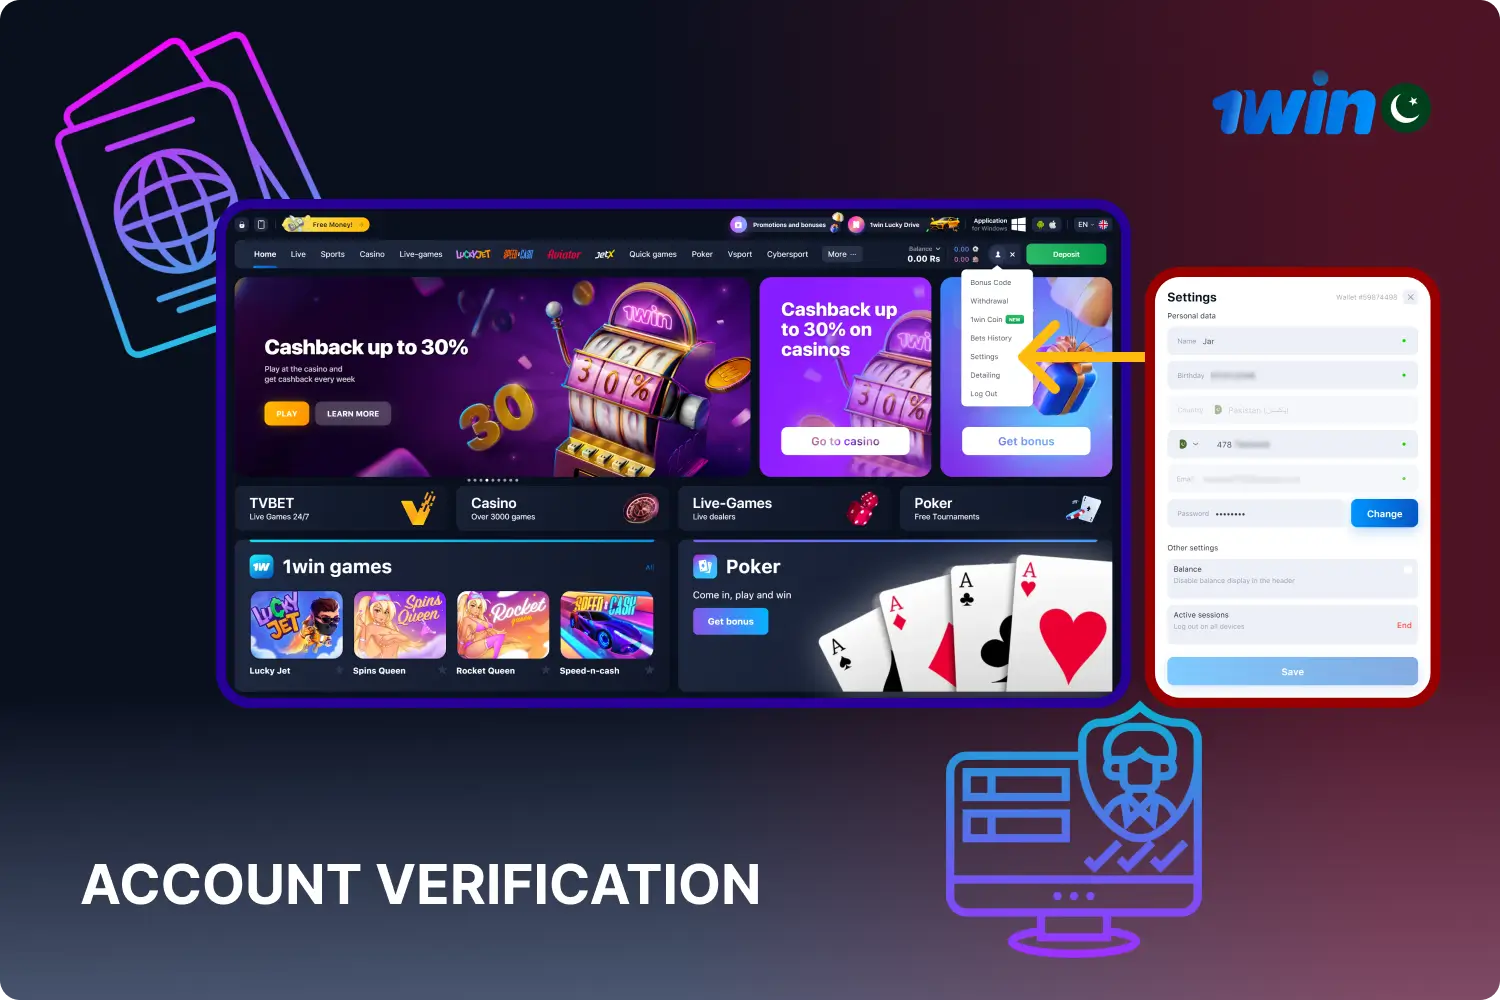 1win account verification is required to access all features of the platform, users can do this in a few simple steps